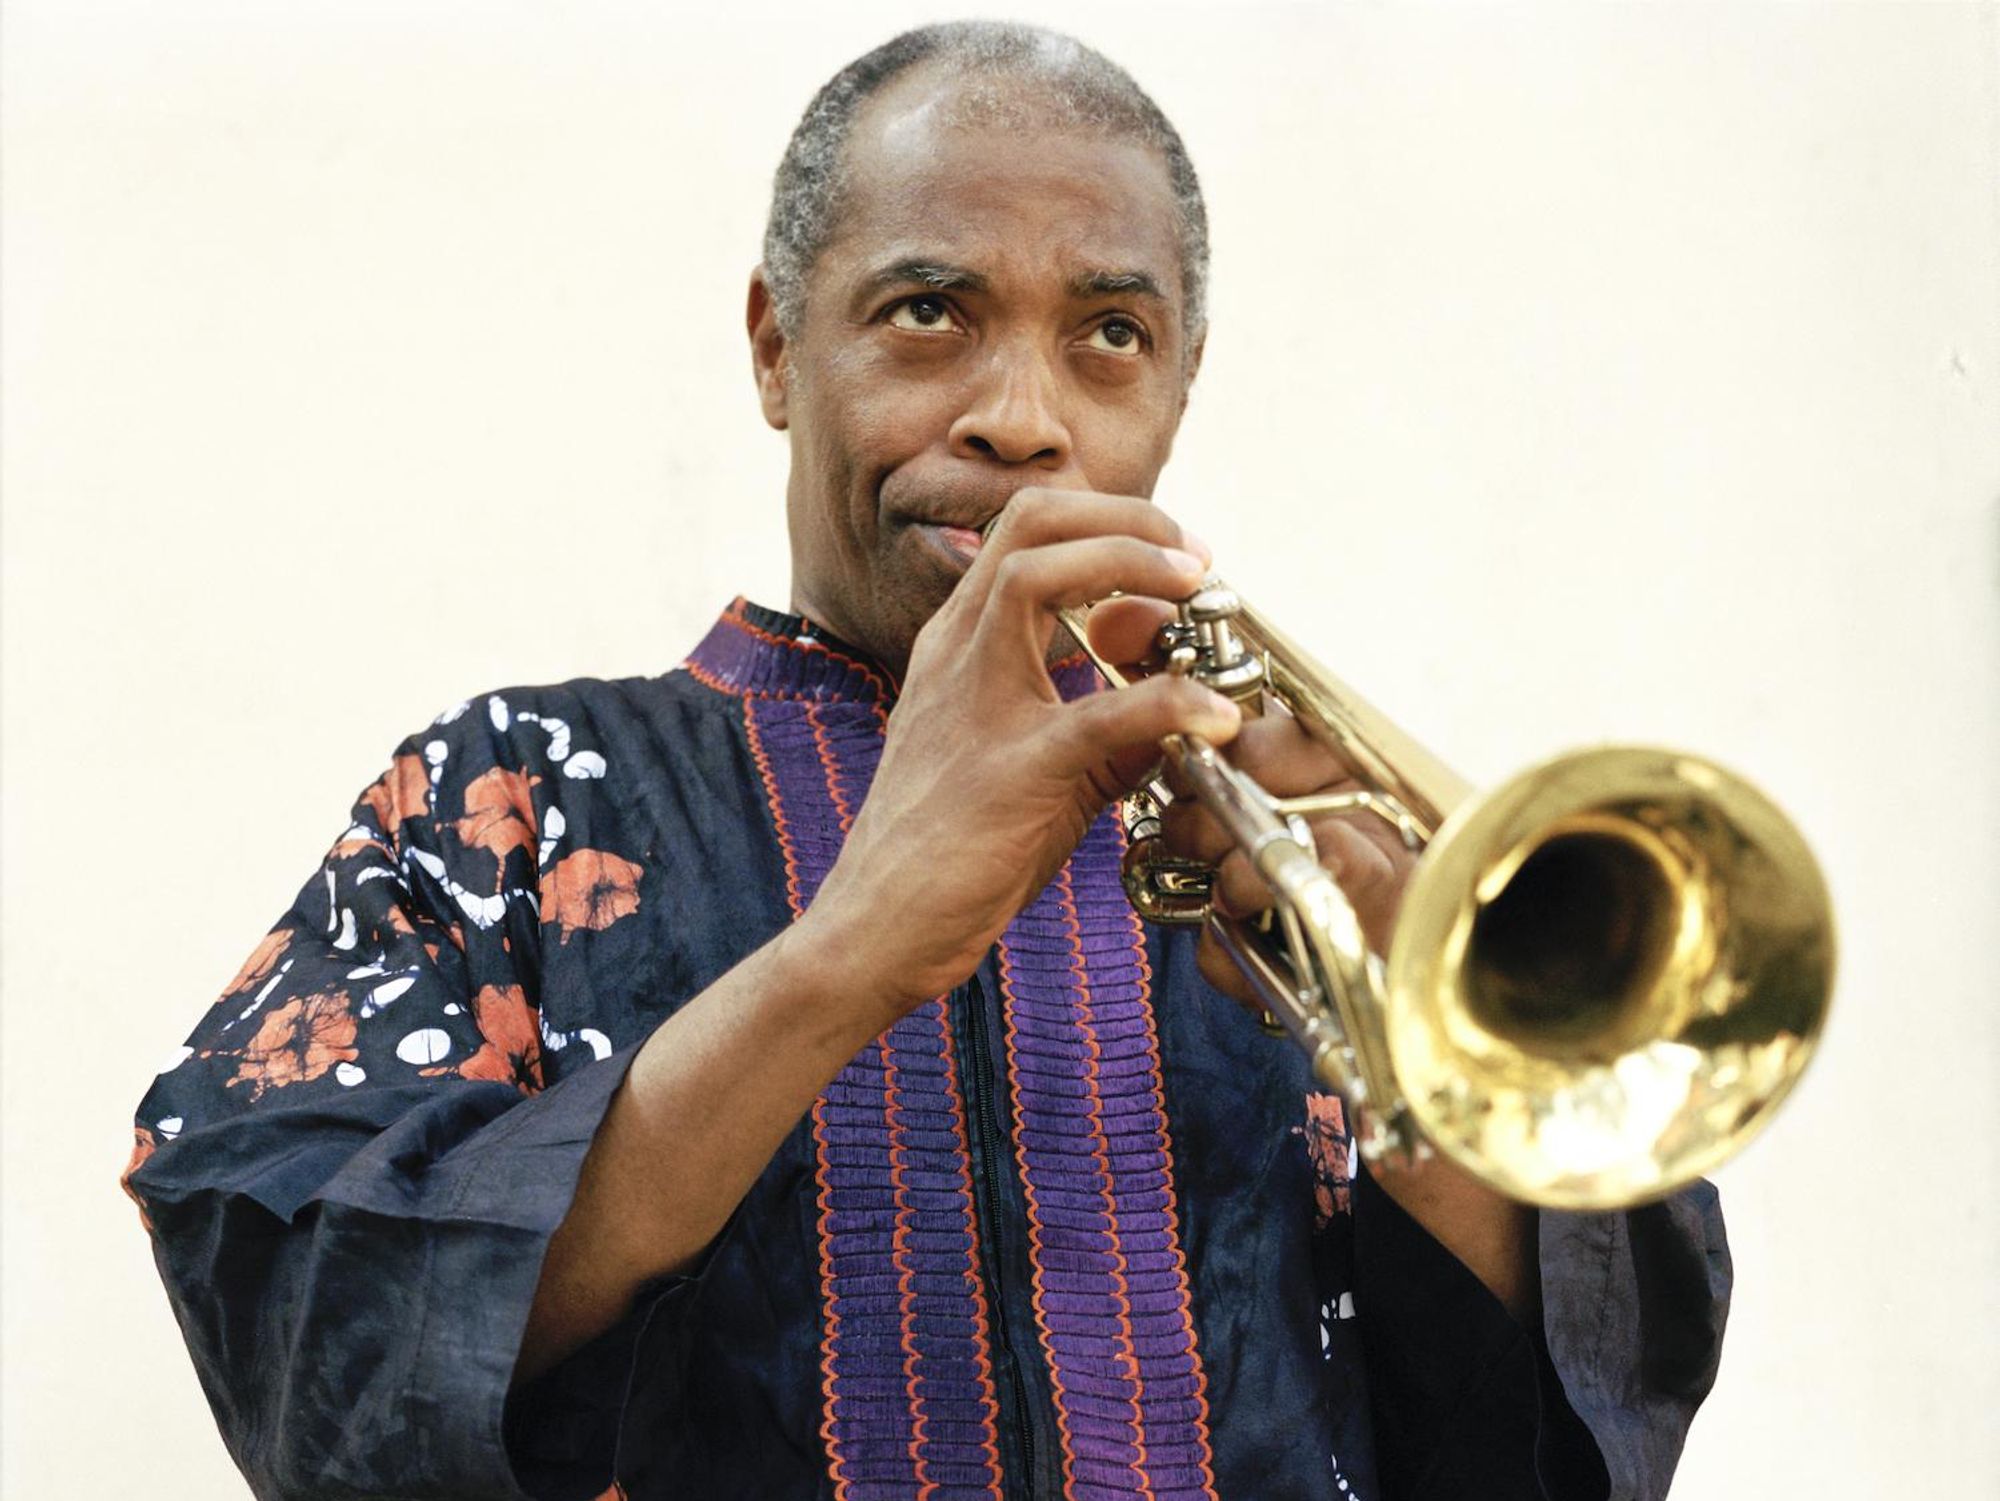 Femi Kuti stands while played a trumpet.